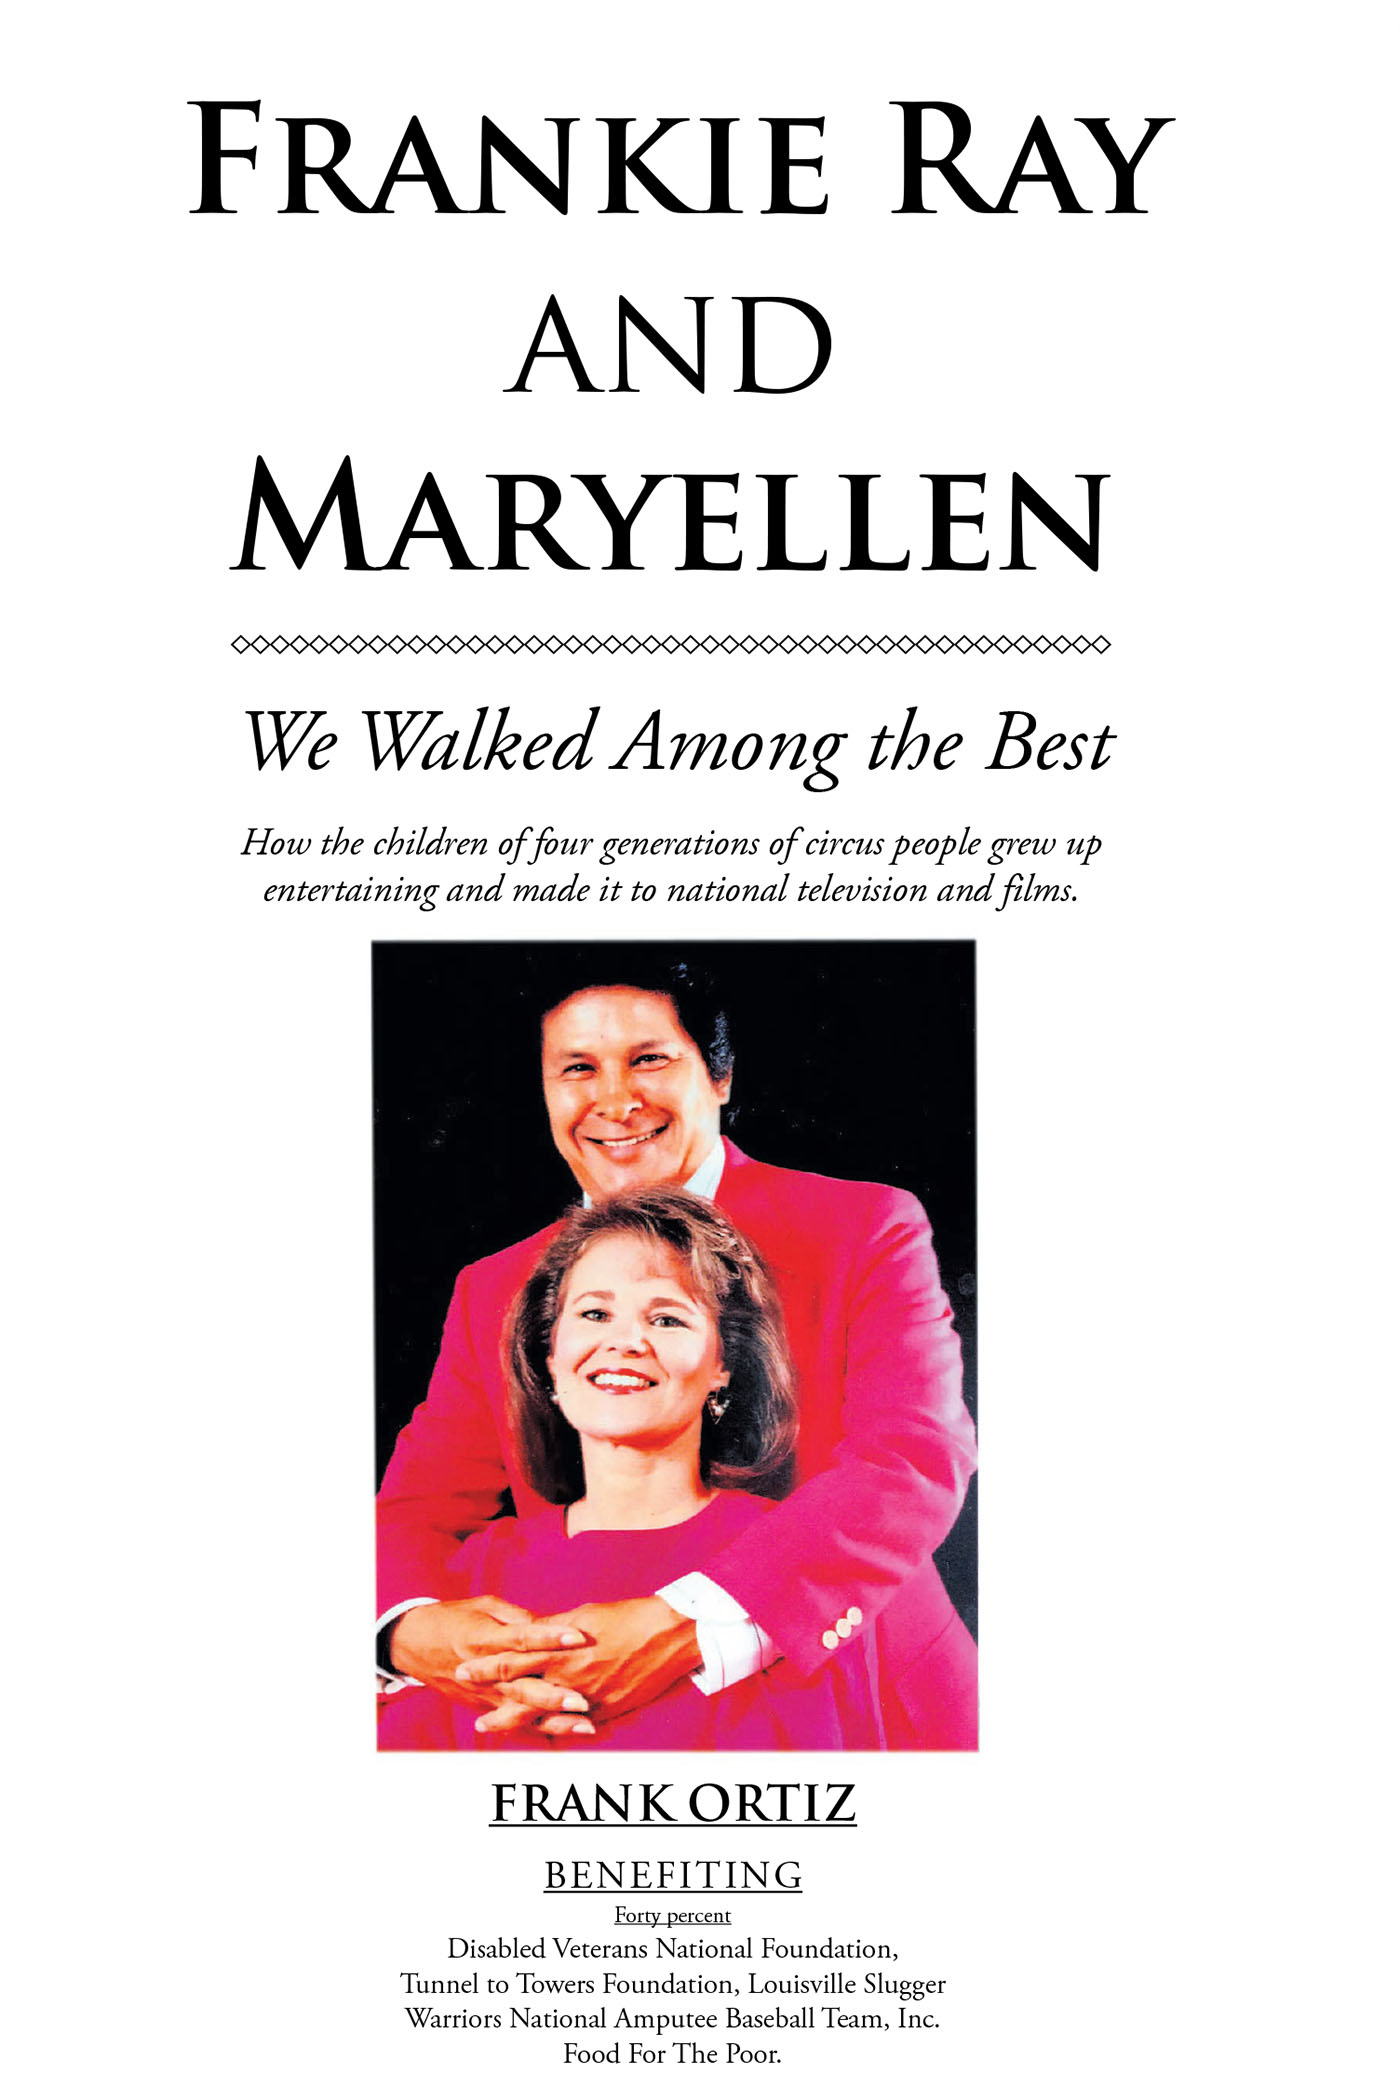 Author Frank Ortiz’s New Book, "Frankie Ray and Maryellen: We Walked Among the Best," Follows the Author’s Impressive and Storied Career